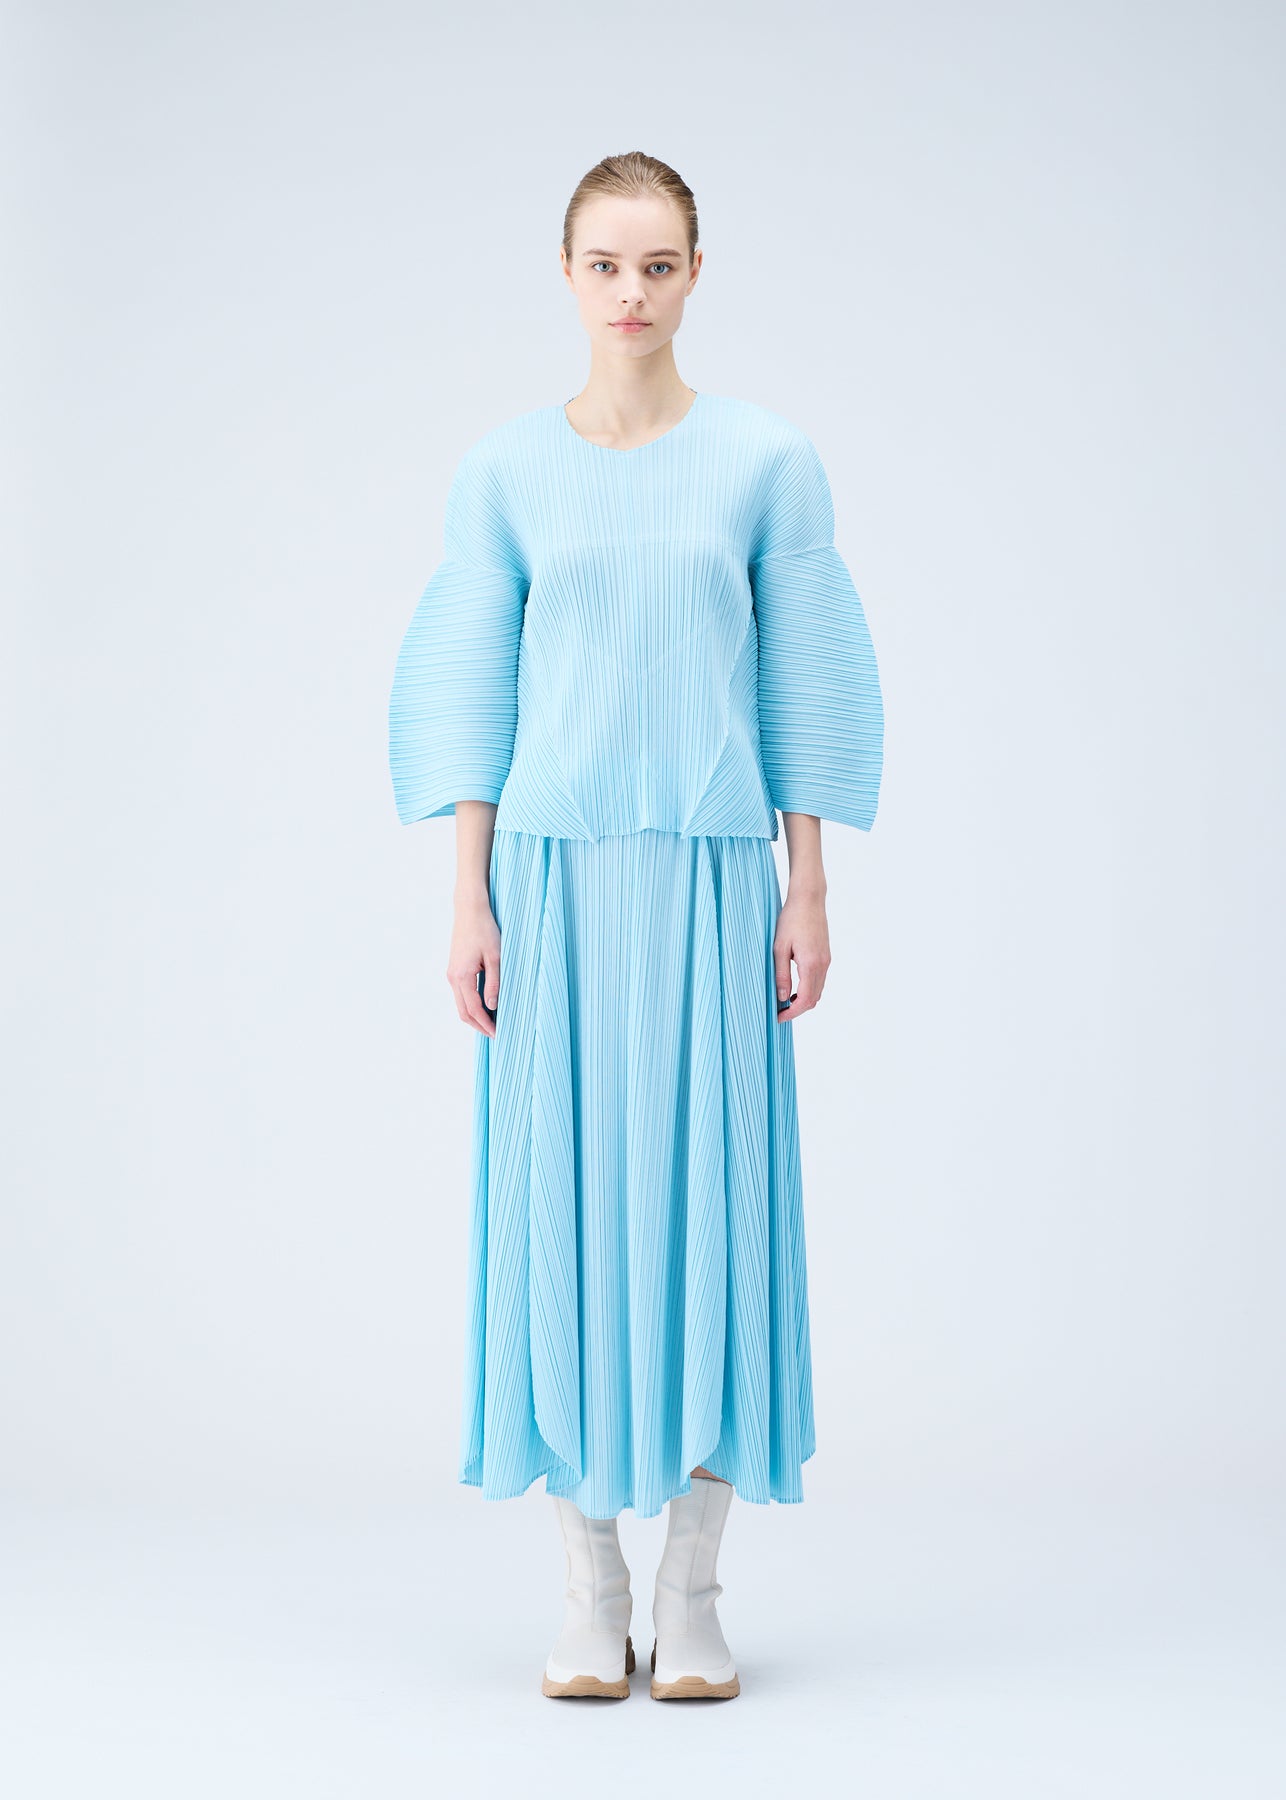 FROZEN FLOWER SKIRT | The official ISSEY MIYAKE ONLINE STORE